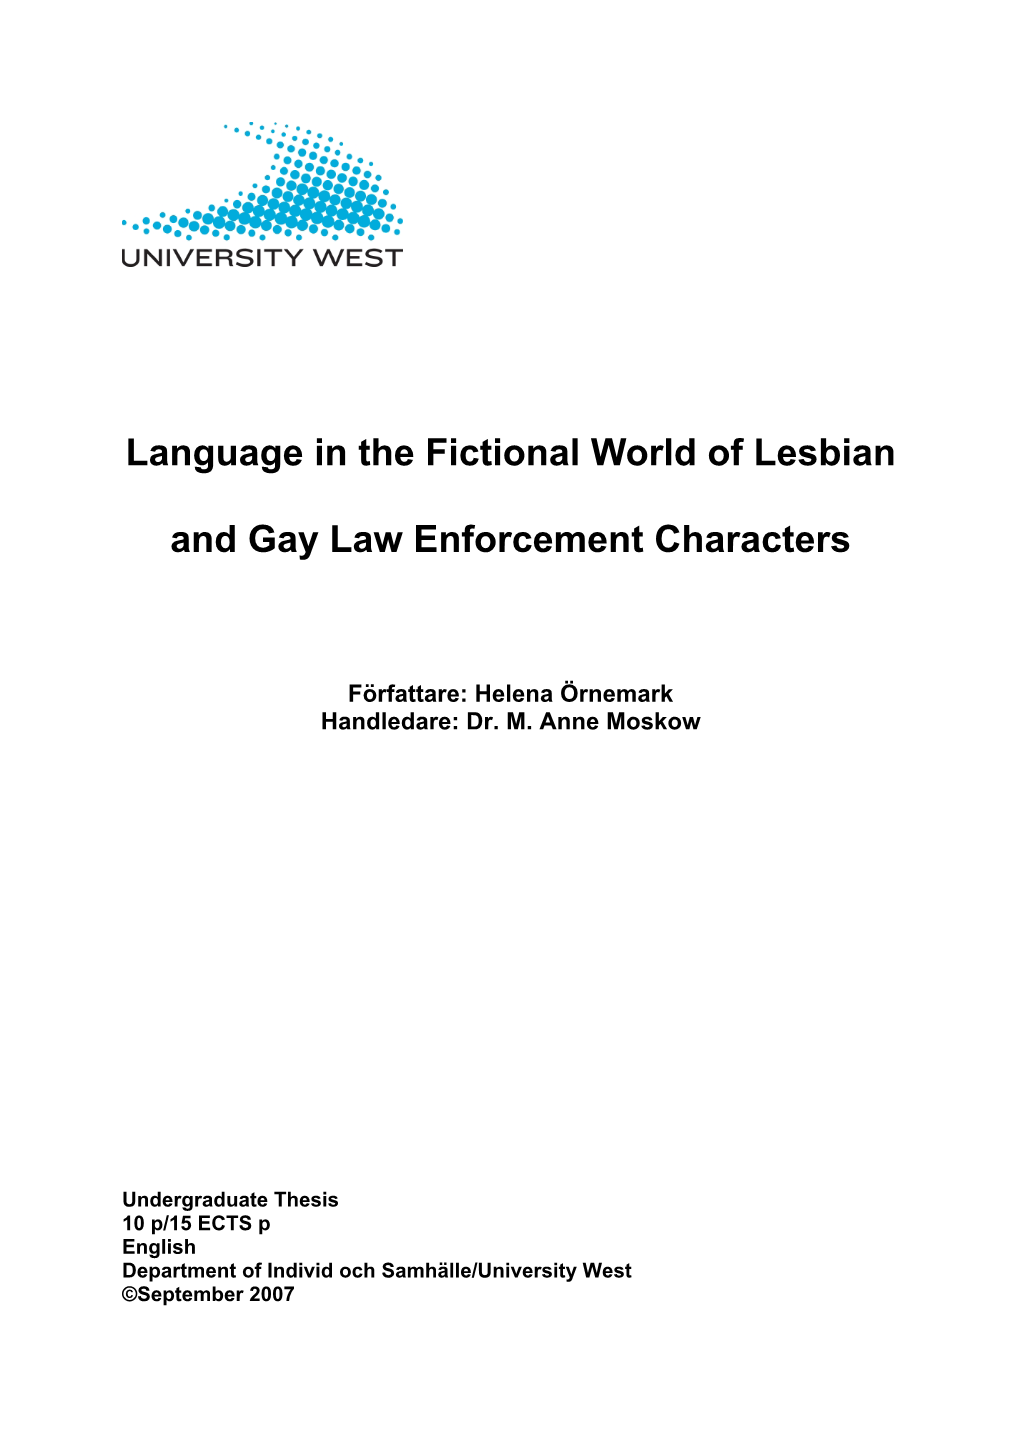 Language in the Fictional World of Lesbian And